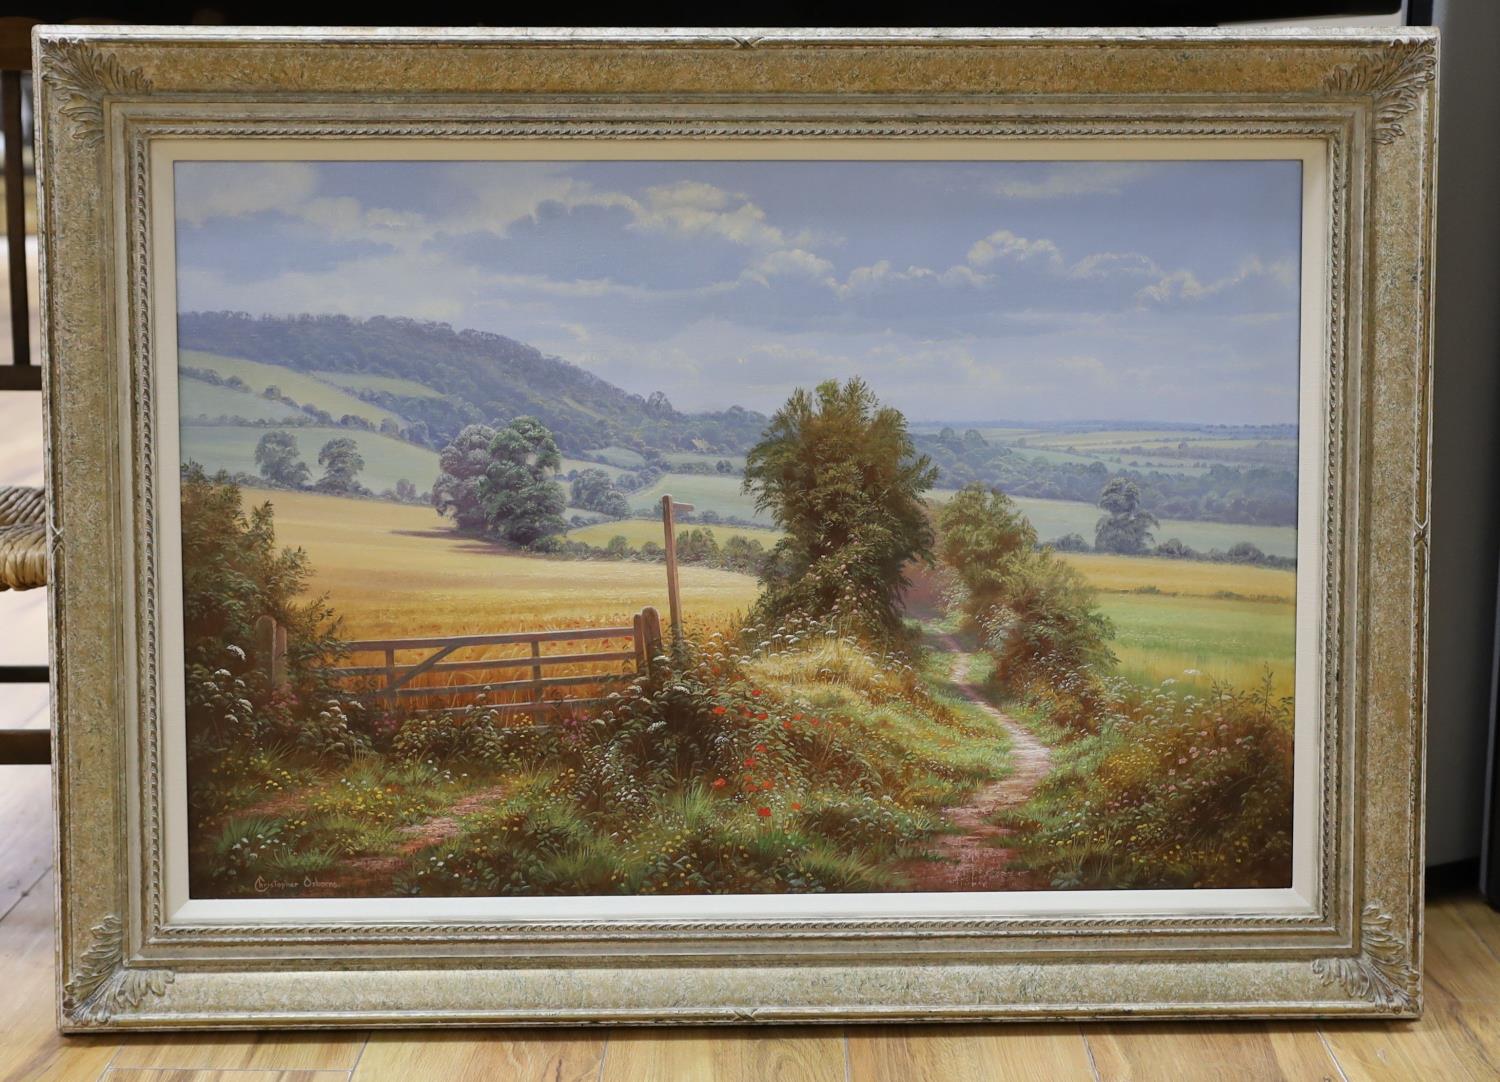 Christopher Osbourne (1947-), oil on canvas, 'Across the fields, The Pilgrims Way at Wrotham, Kent', - Image 2 of 4